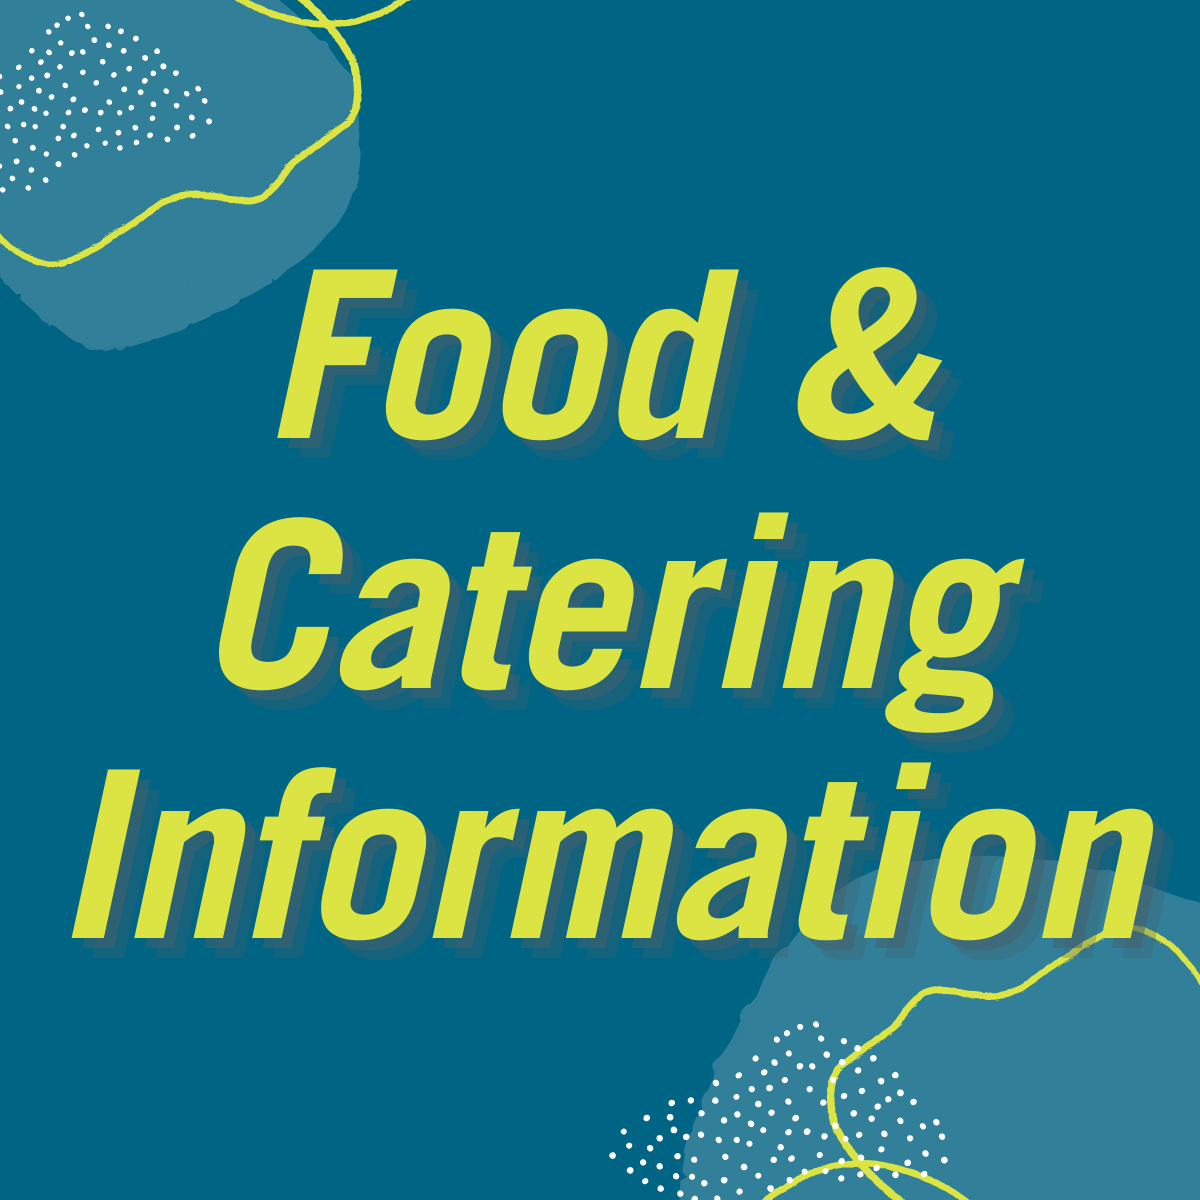 Food & Catering information